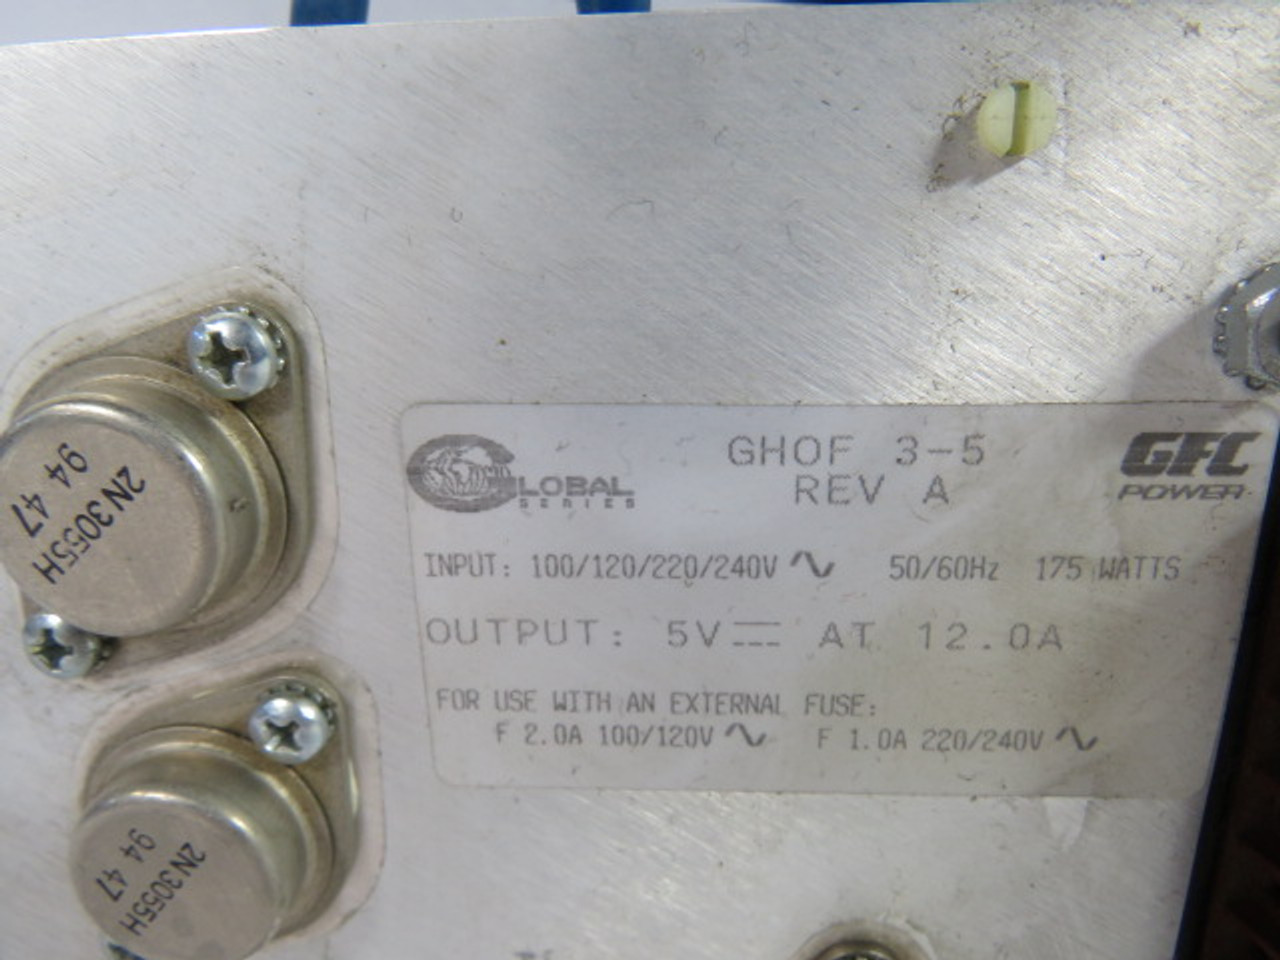 GFC GHOF-3-5 Power Supply In. 100/120/220/240VAC 50/60Hz. .75W USED